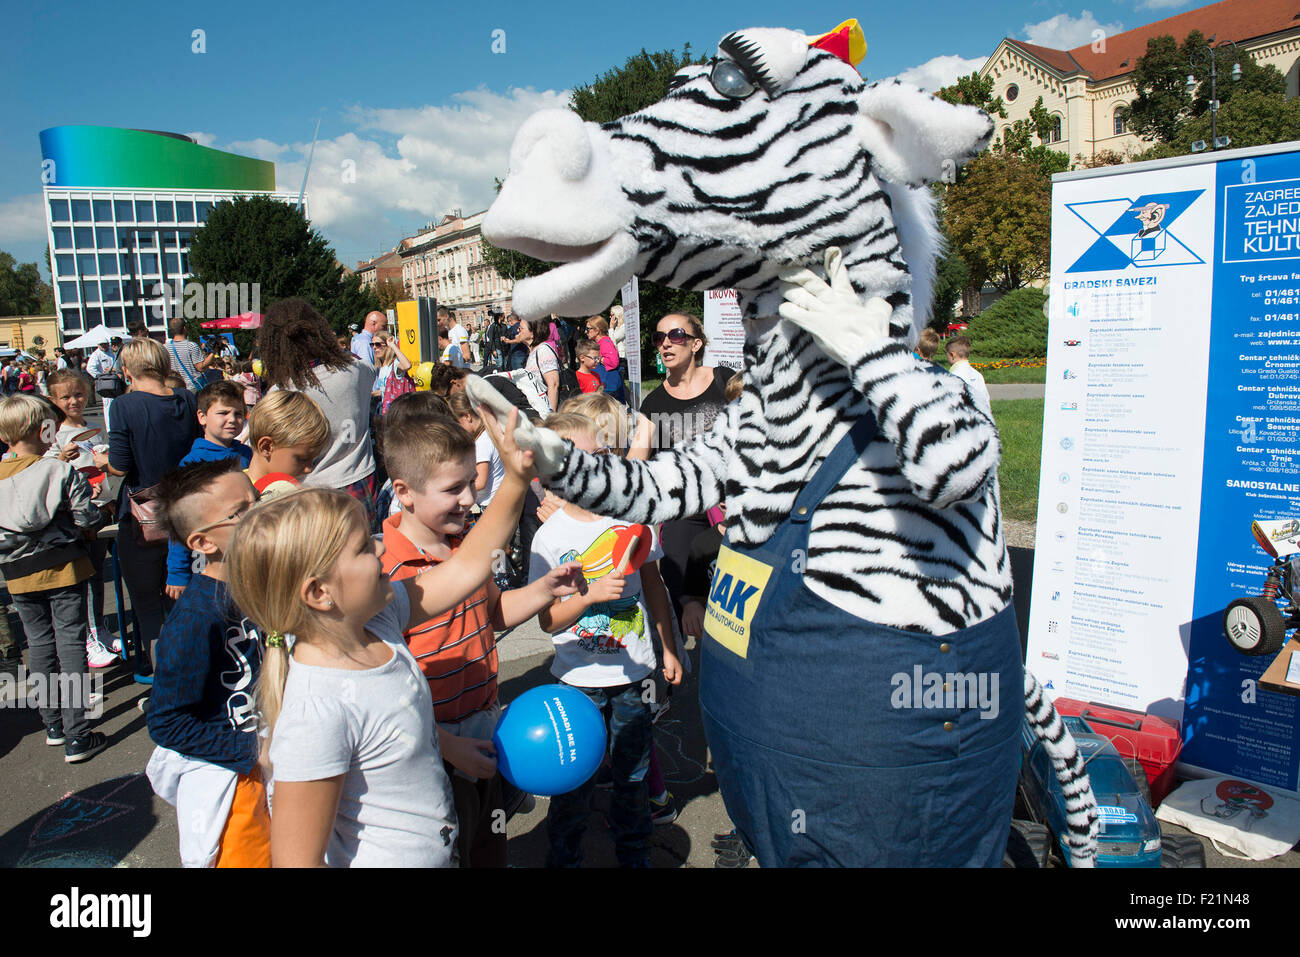 Zagreb, Croatia. 9th Sep, 2015. Kids participate in a traffic safety program event at Marshal Tito Square in Zagreb, capital of Croatia, Sept. 9, 2015. Local authorities and Police Department organized similar events in all major cities around Croatia to communicate important road safety messages to kids and drivers as new school year kicked-off here on Monday. © Miso Lisanin/Xinhua/Alamy Live News Stock Photo